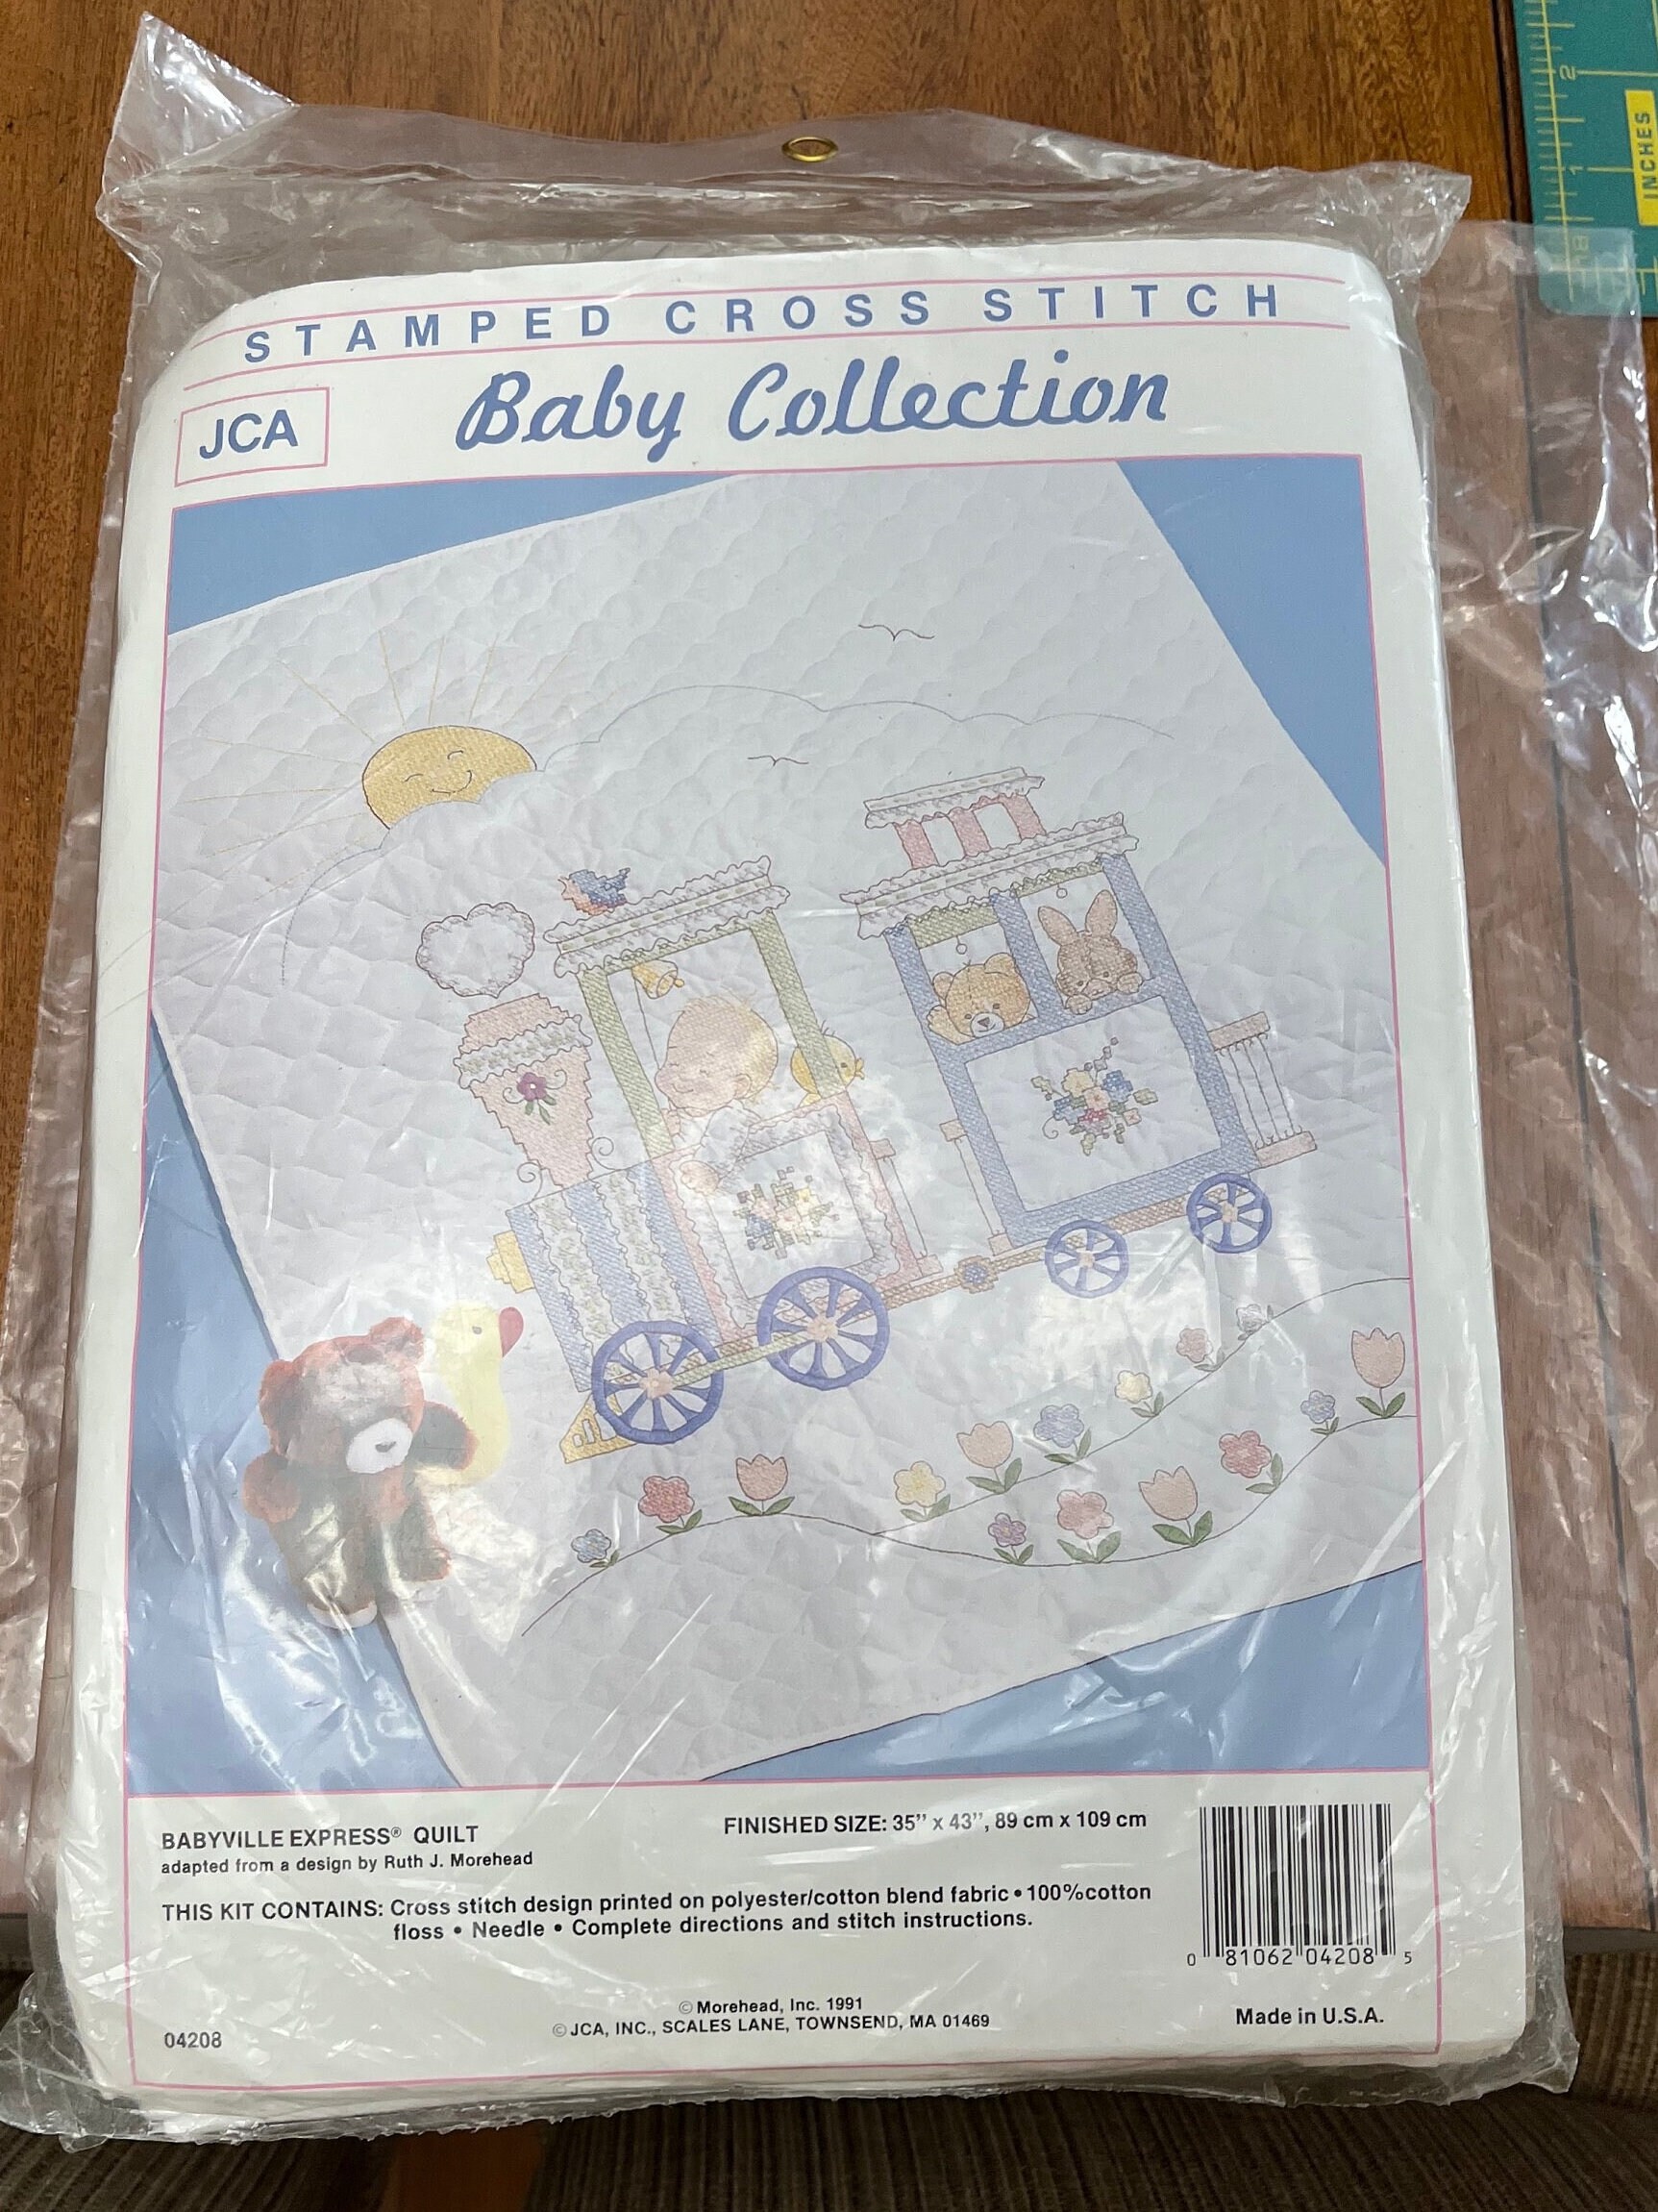 Bucilla Sweet Baby Crib Cover Baby Quilt Stamped Cross Stitch Kit 